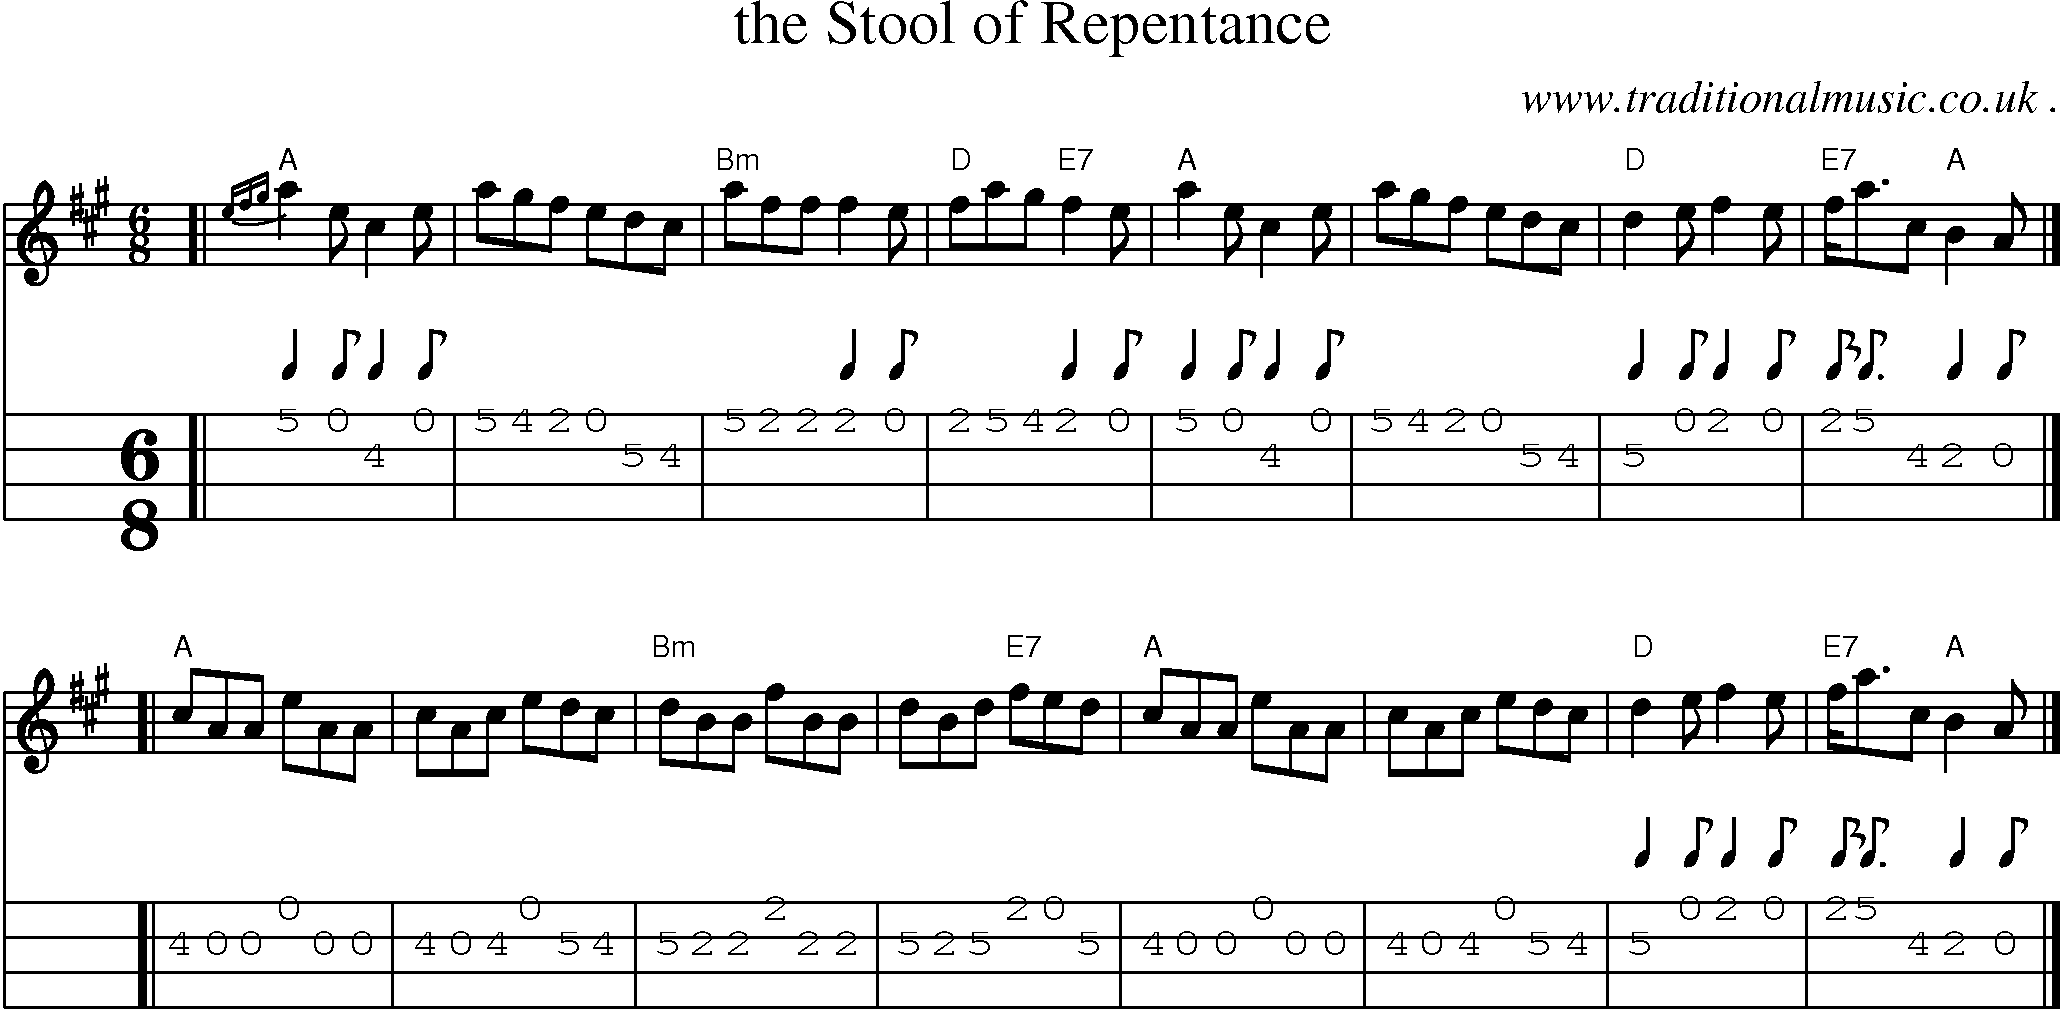 Sheet-music  score, Chords and Mandolin Tabs for The Stool Of Repentance